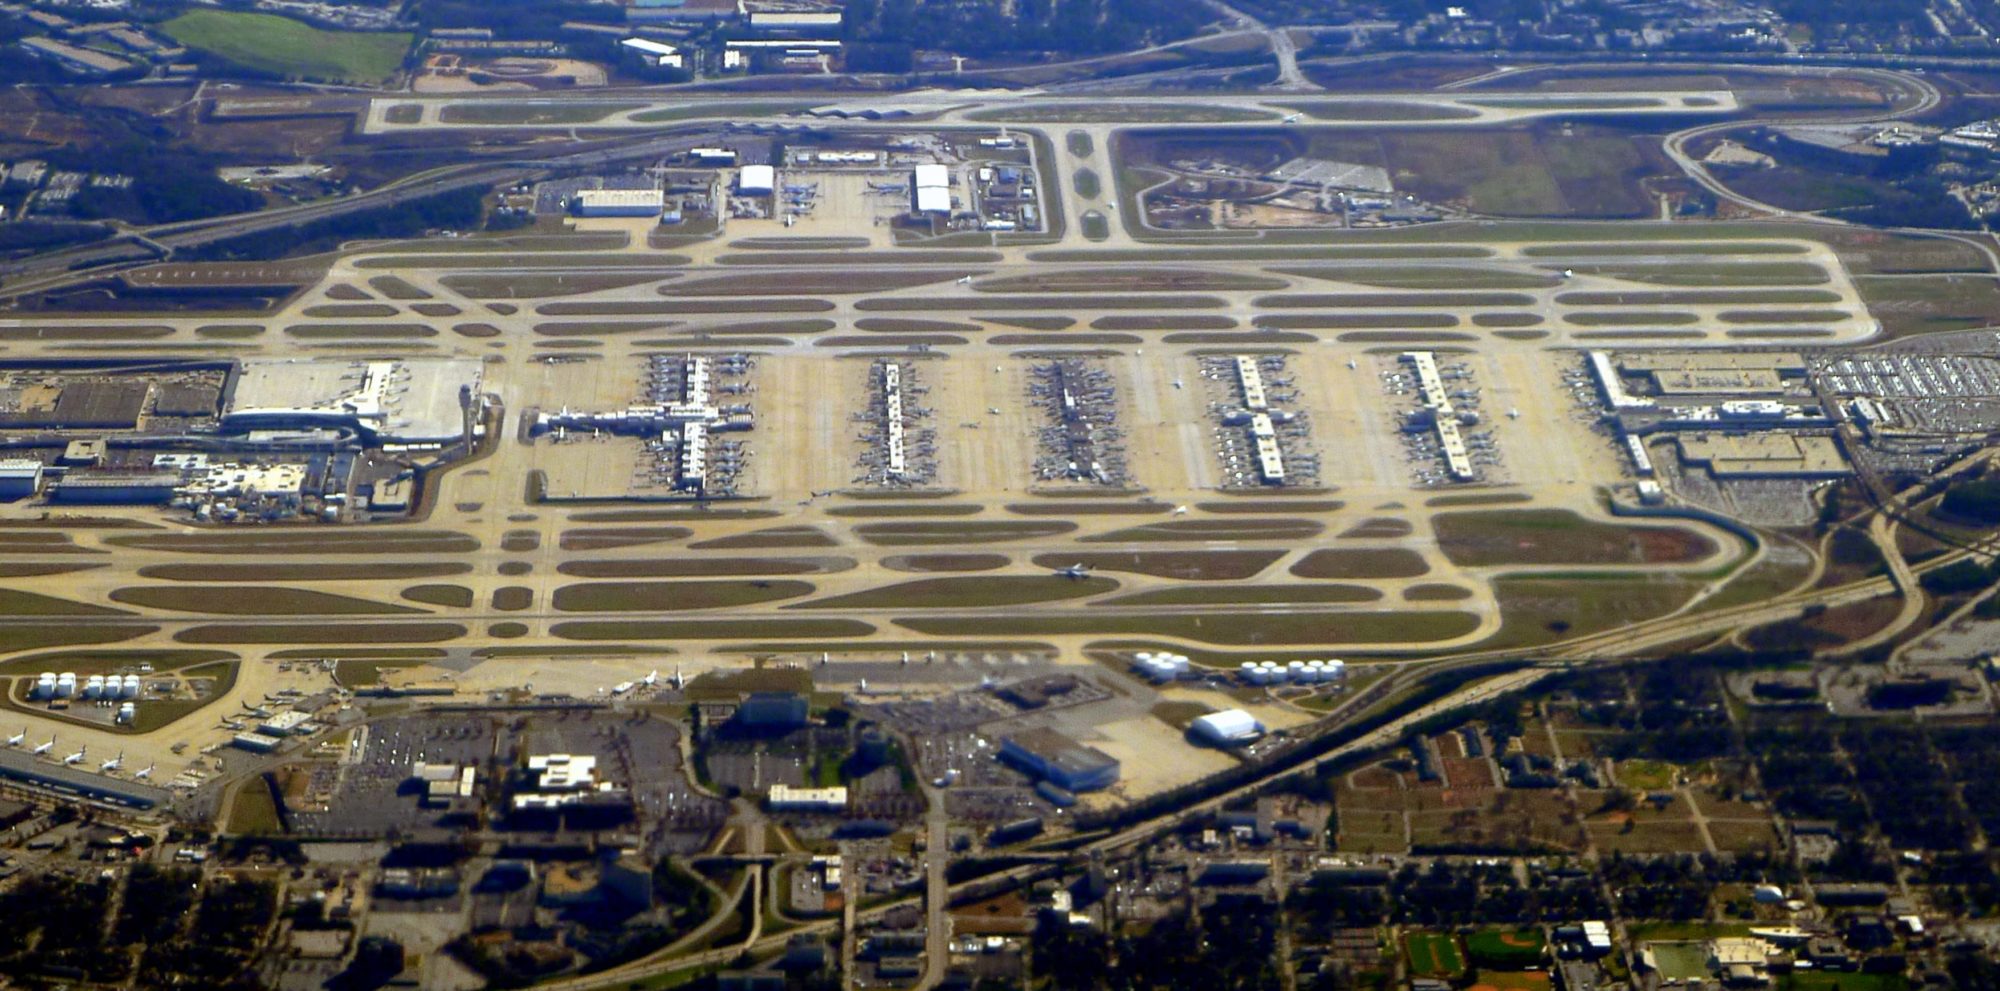 Aerial view of Atlanta airport in daylight